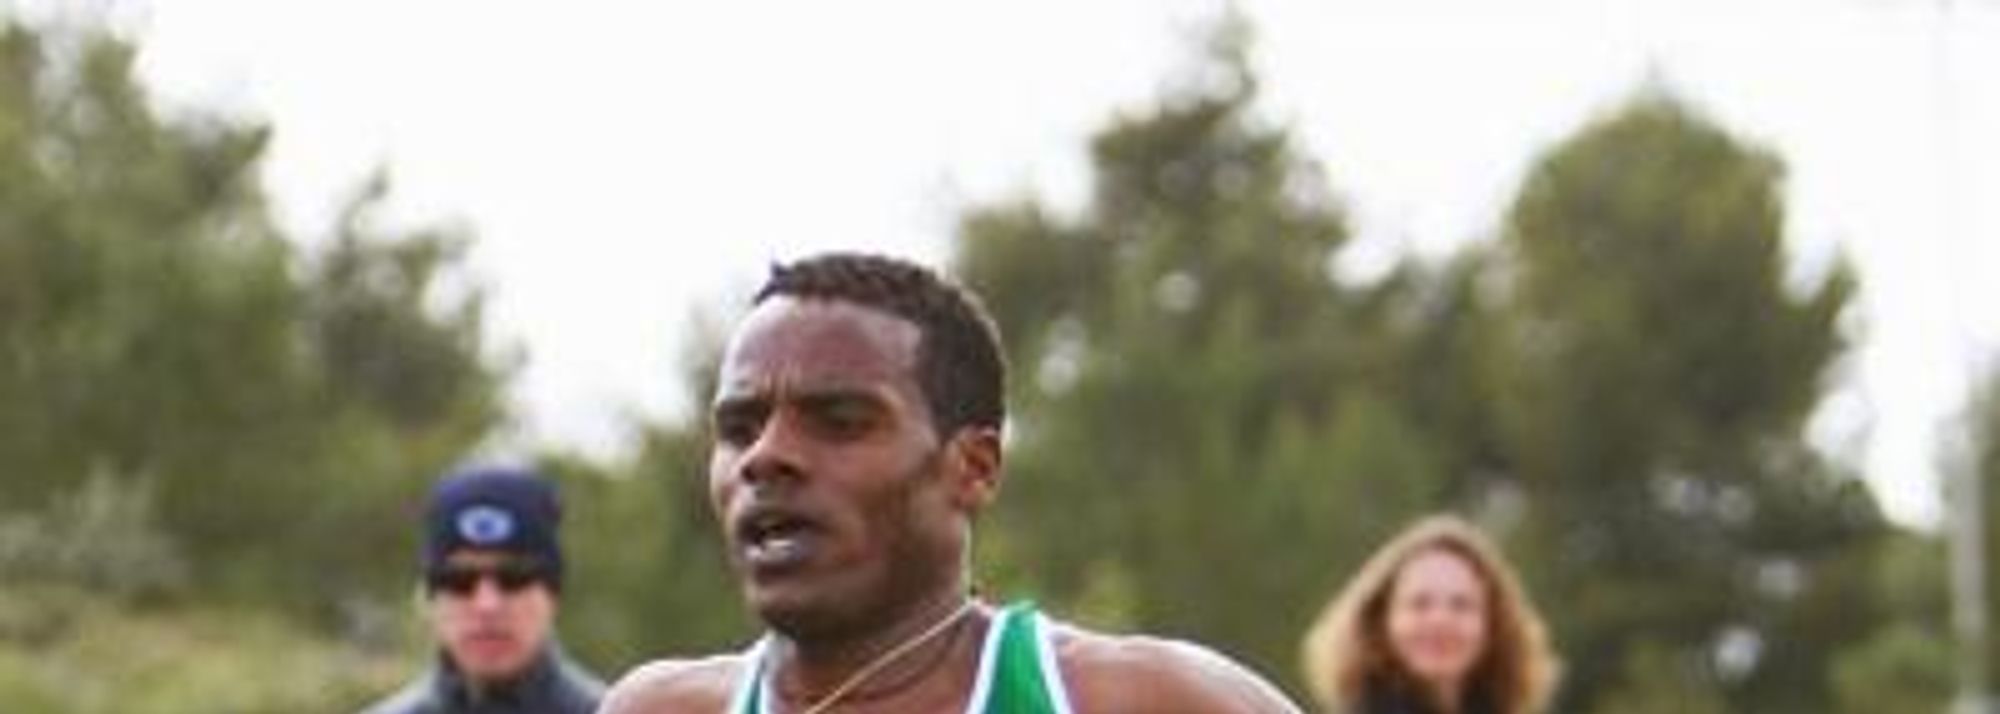 - Young boys tend to look up to their older brothers and Ayele Abshero was no different. Tessema Abshero was born four years before Ayele and was among Ethiopia’s best young Cross Country runners before developing into a 2:08 marathoner. </P>